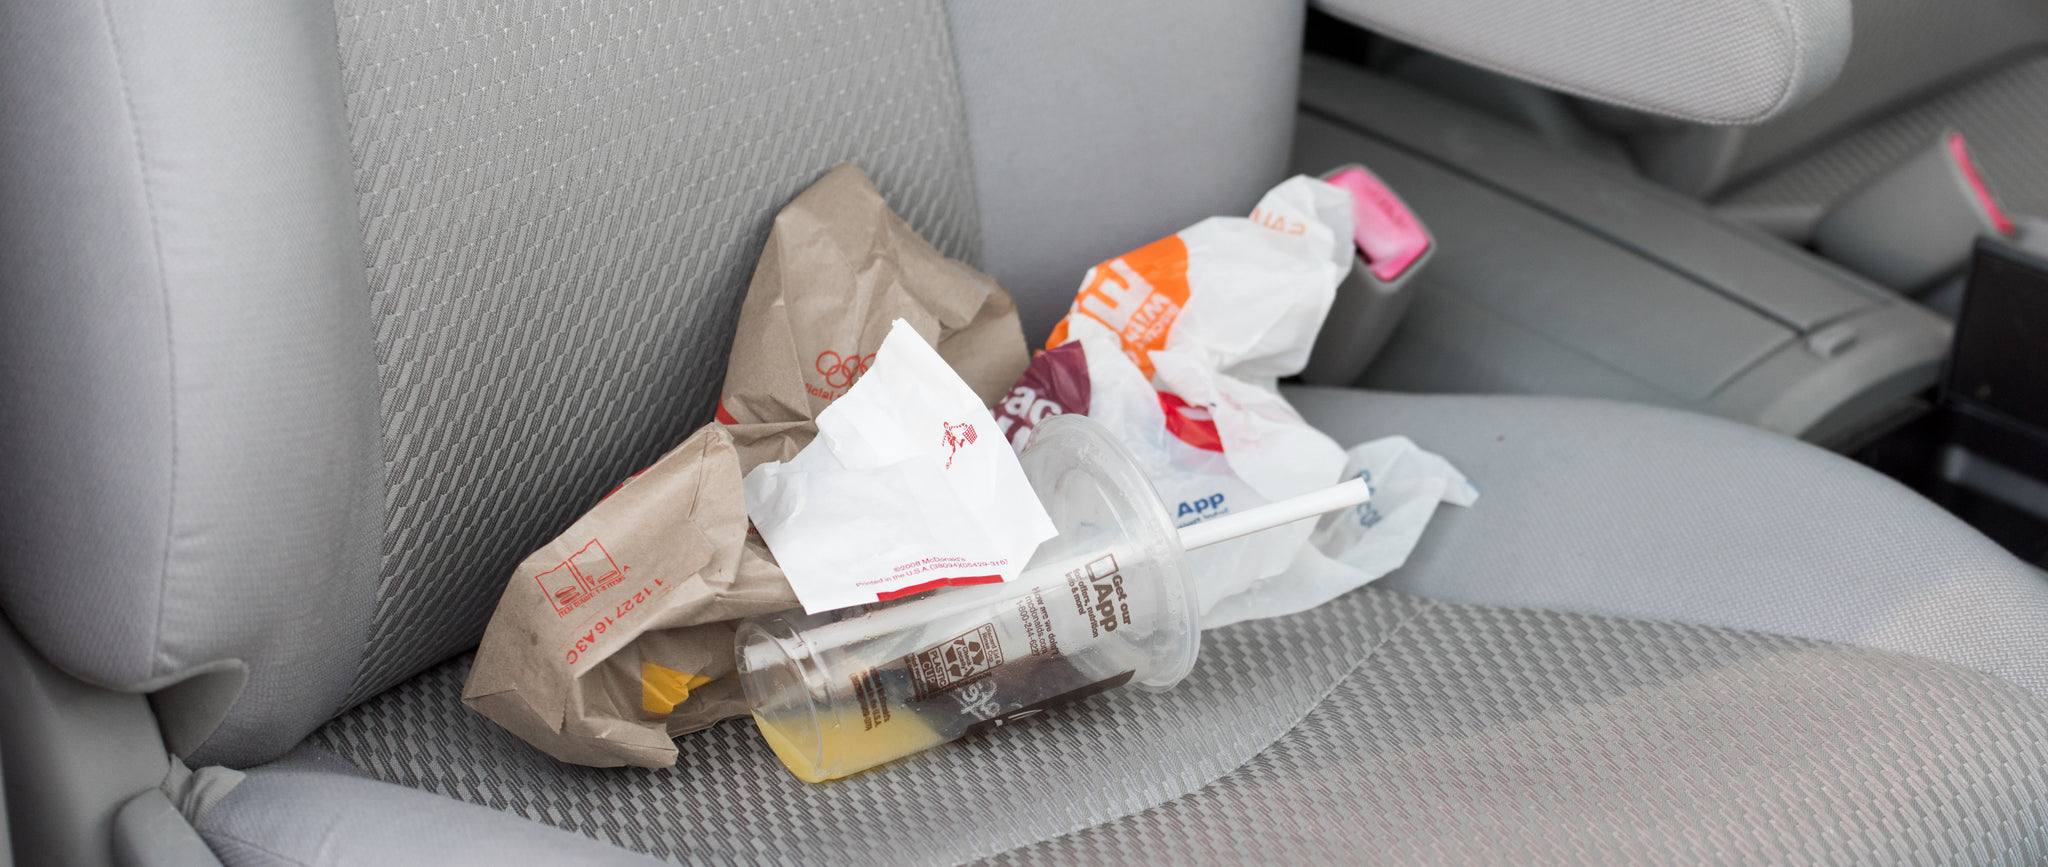 garbage in the car